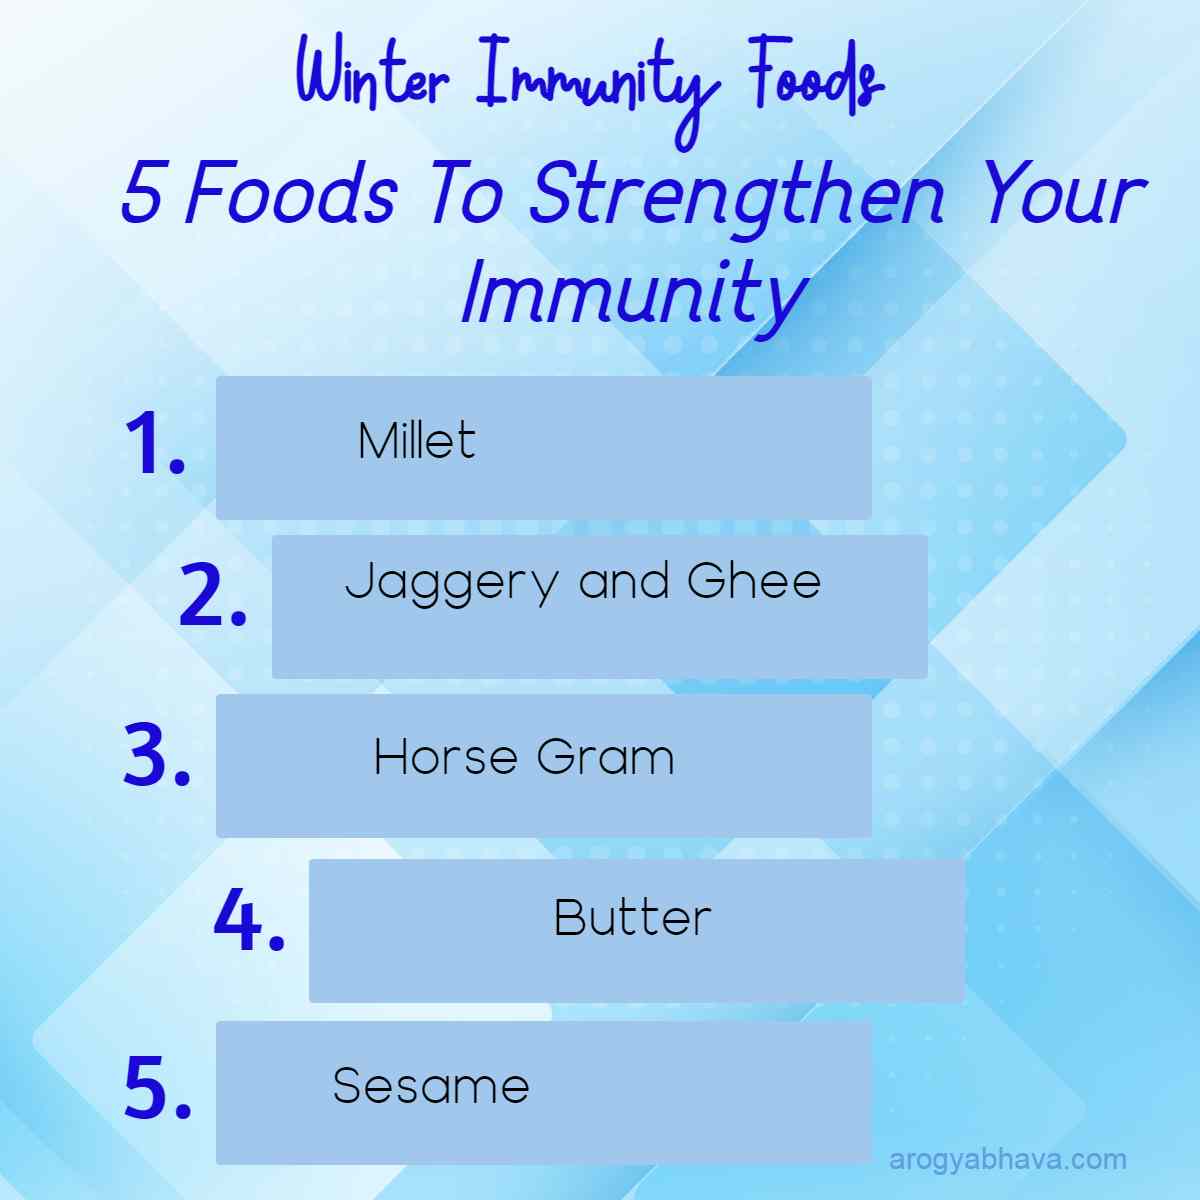 Winter Immunity Foods: 5 Foods To Strengthen Your Immunity